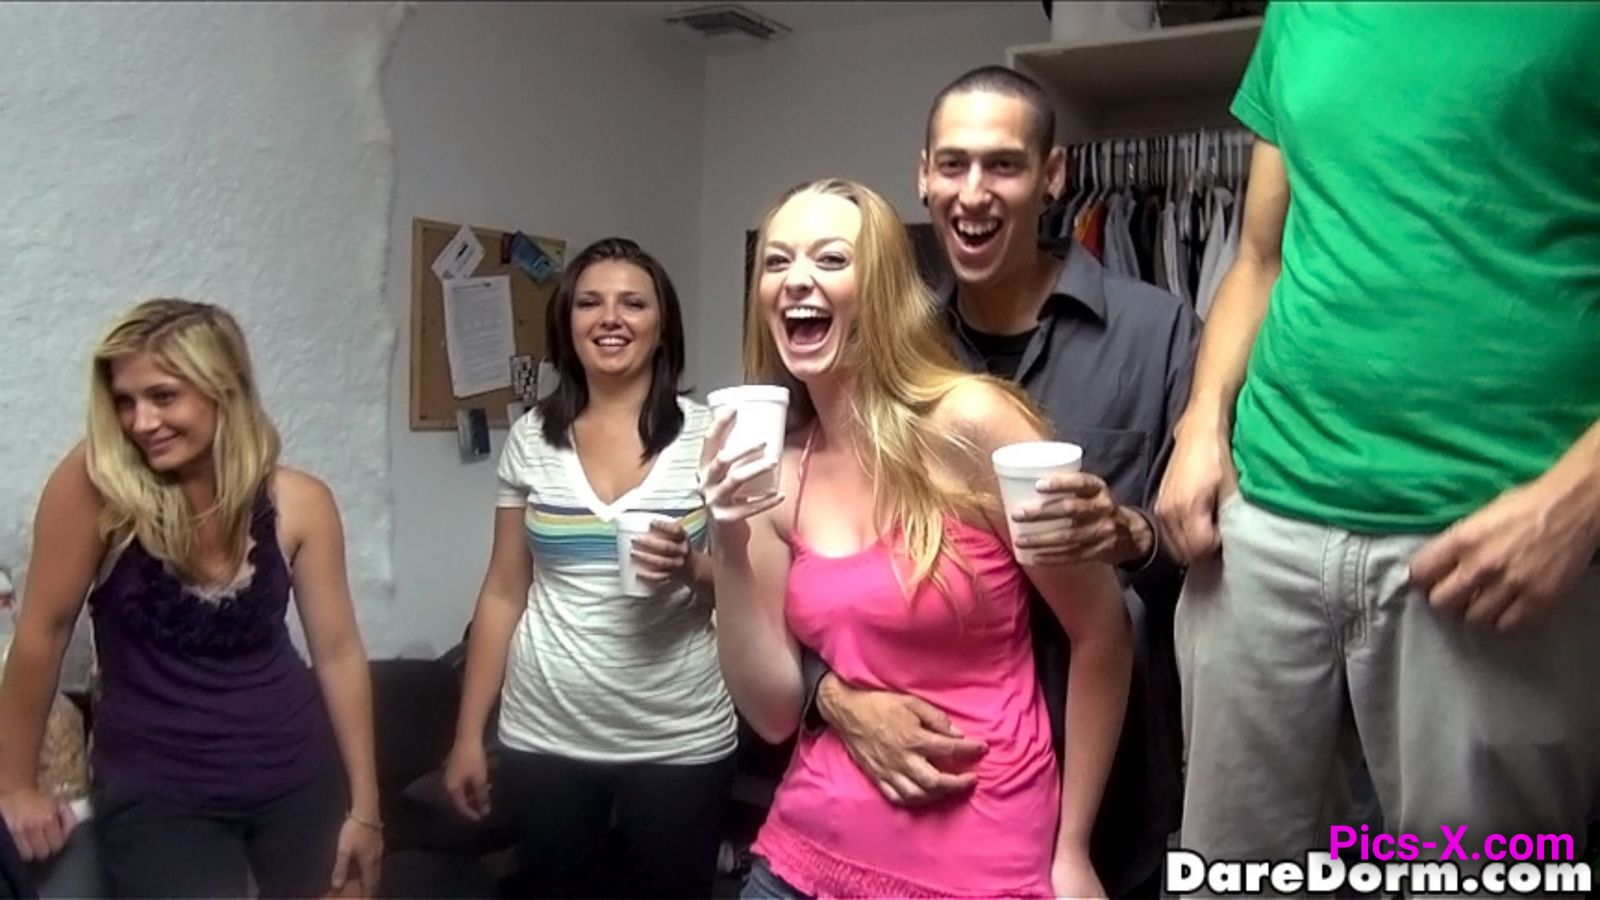 Ordering Strippers - Dare Dorm - Image 38